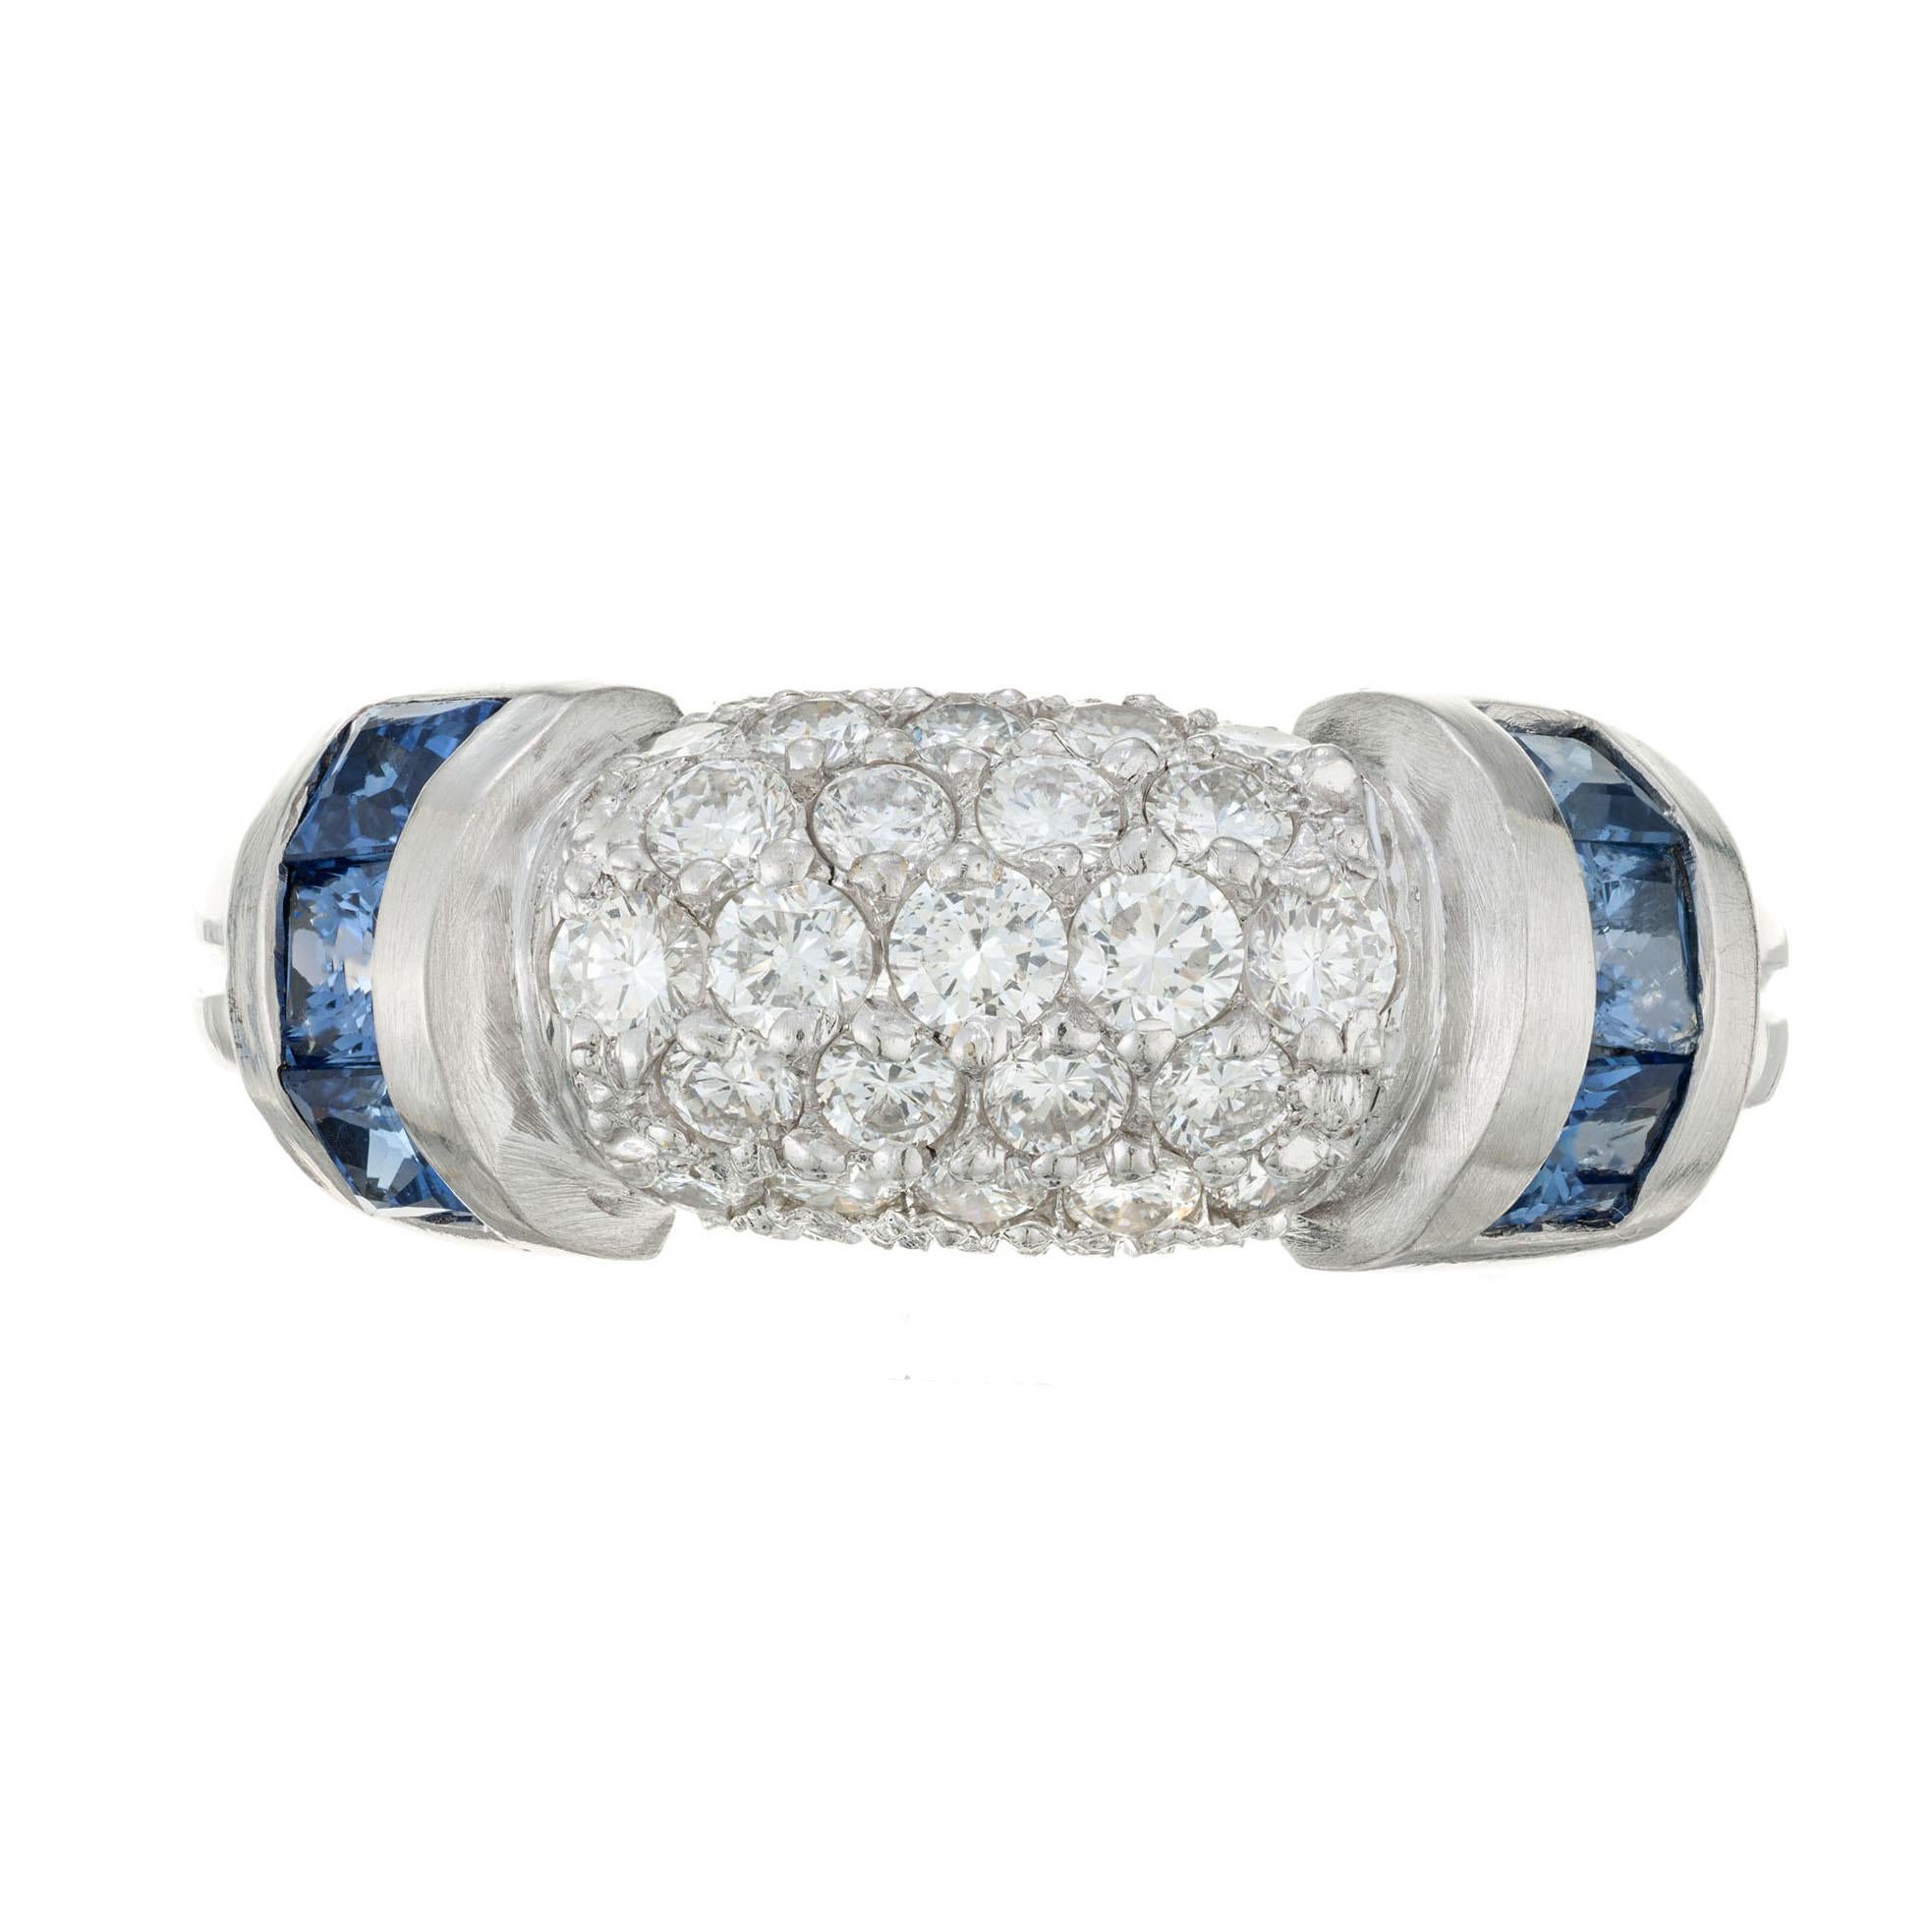 Authentic Judith Ripka sapphire an diamond 18k white gold dome ring.  The center is bead set with 23 Ideal full cut round diamonds with channel set square cut Ceylon sapphires. The signature has been partially altered due to sizing. A few of the